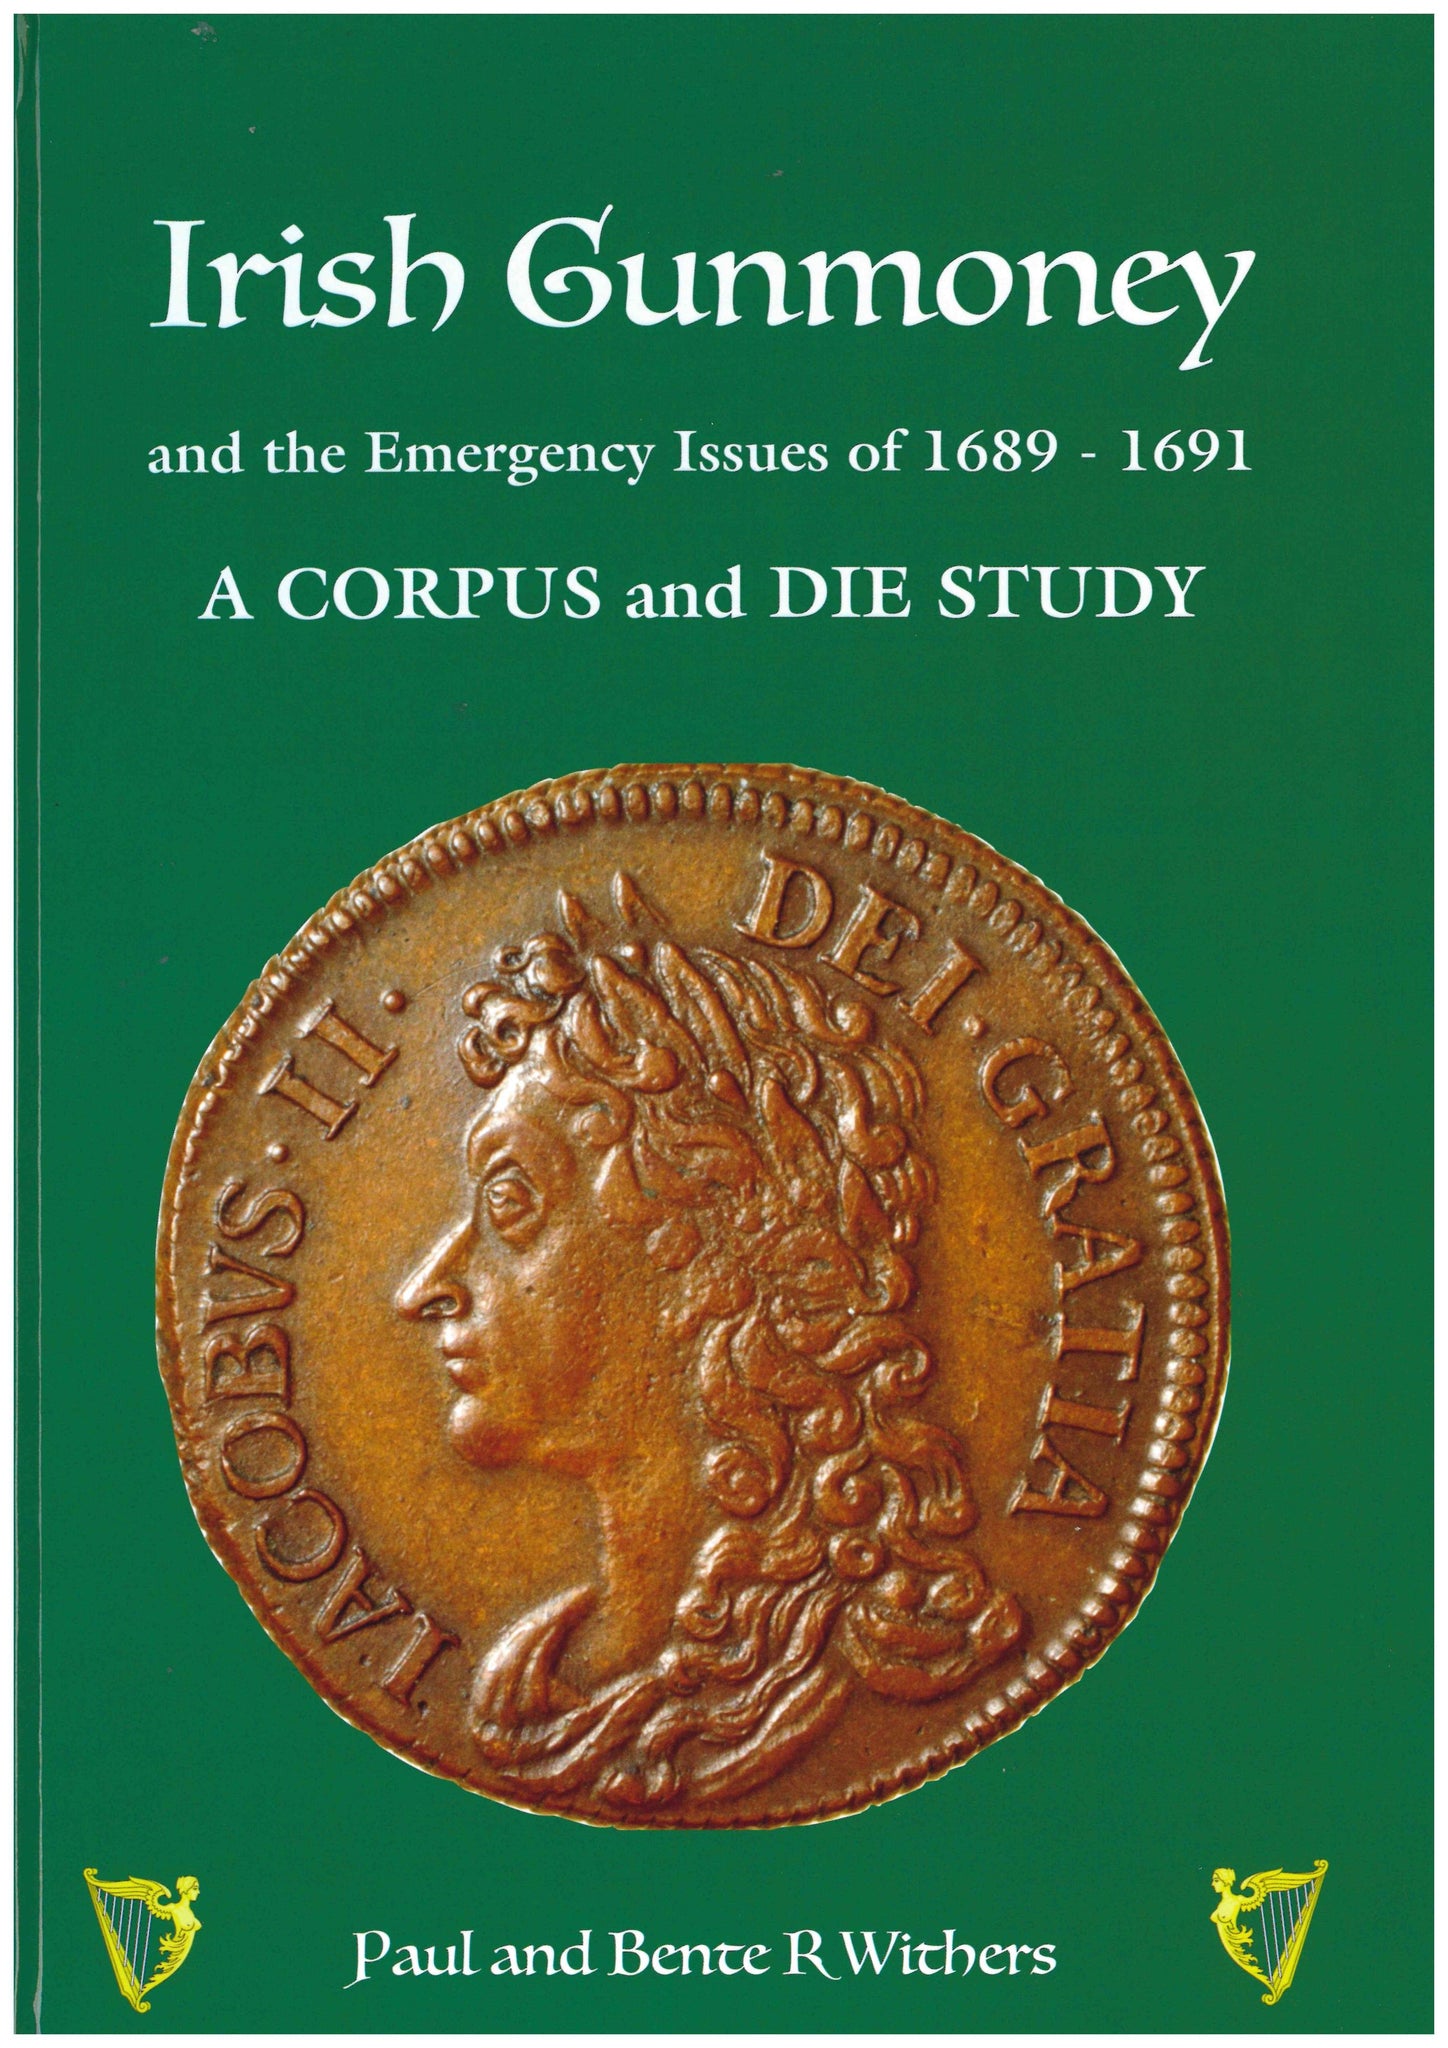 Irish Gunmoney and the Emergency Issues of 1689-1691, A Corpus and Die Study by P & B R Withers